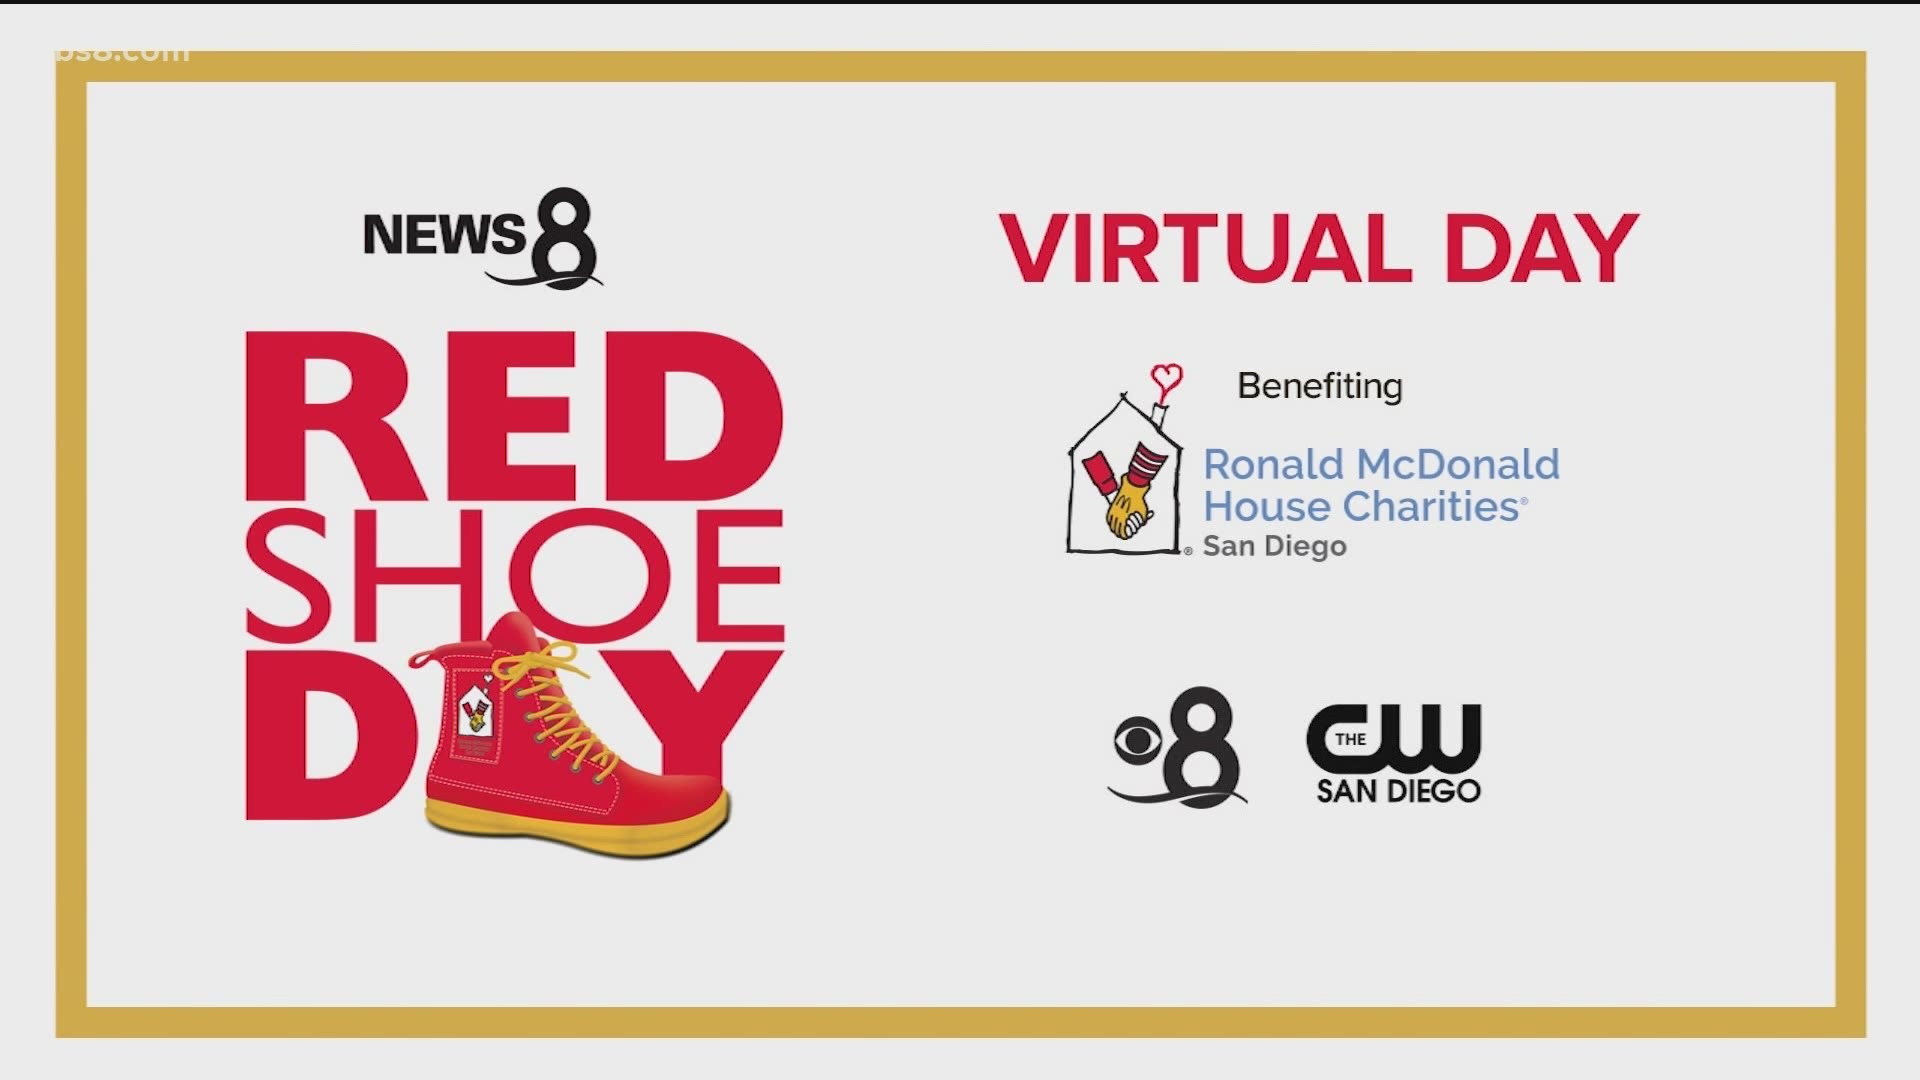 President & CEO of Ronald McDonald House, Chuck Day along with Sosy and Gideon Robinson joined Morning Extra to talk about how the fundraiser has pivoted to online.